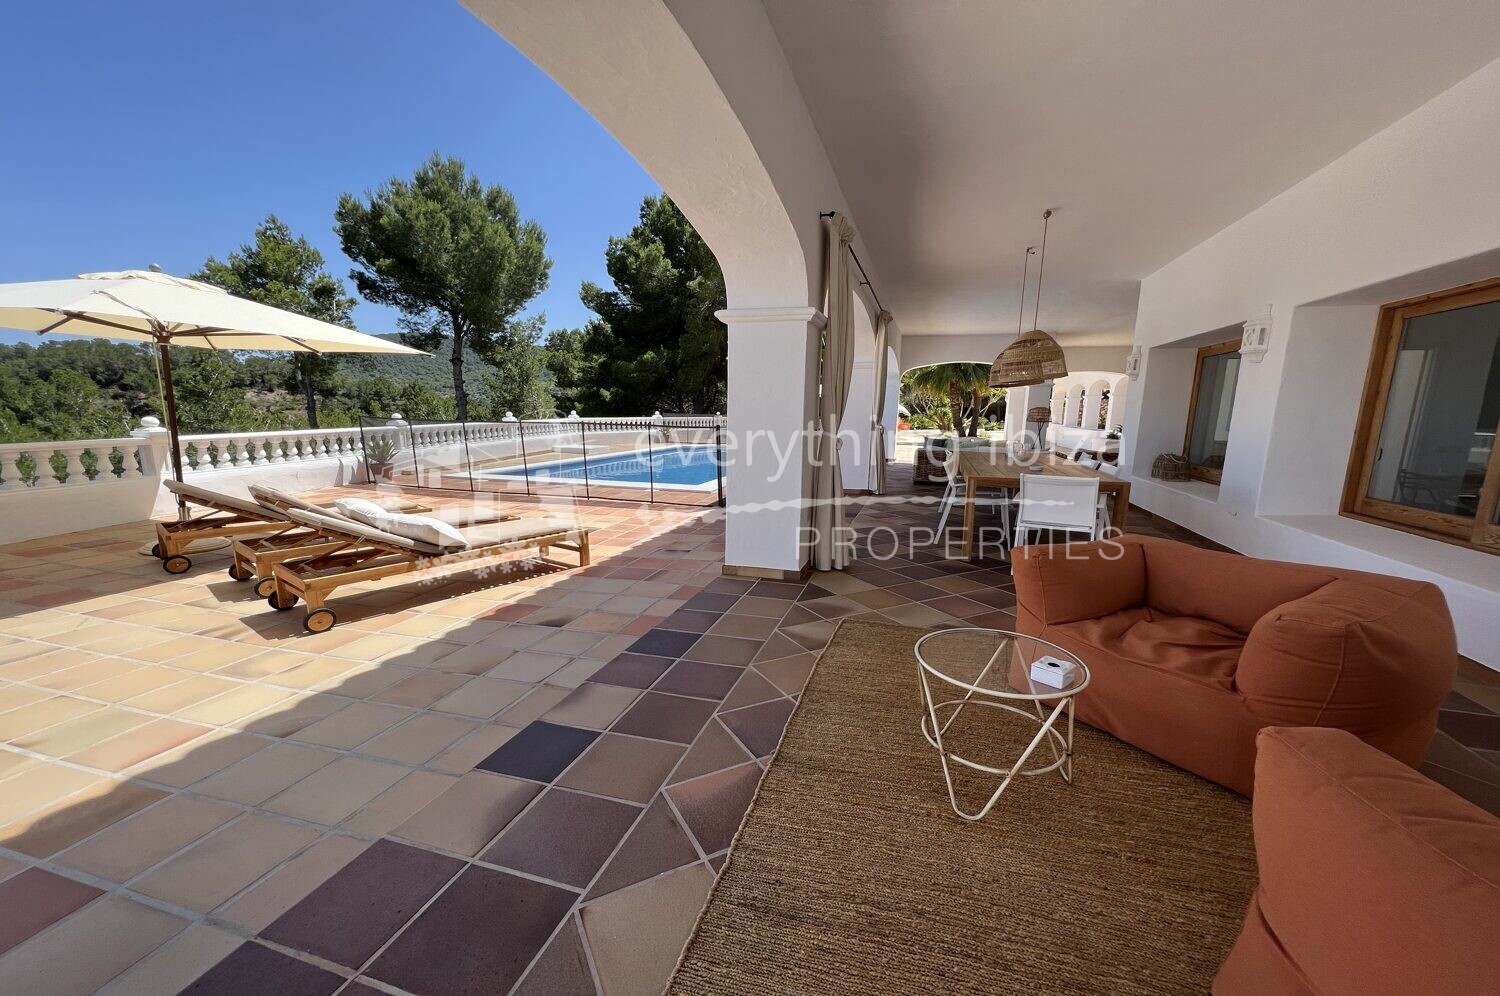 Magnificent Country Villa with Super Views & Tourist License, ref. 1468, for sale in Ibiza by everything ibiza Properties